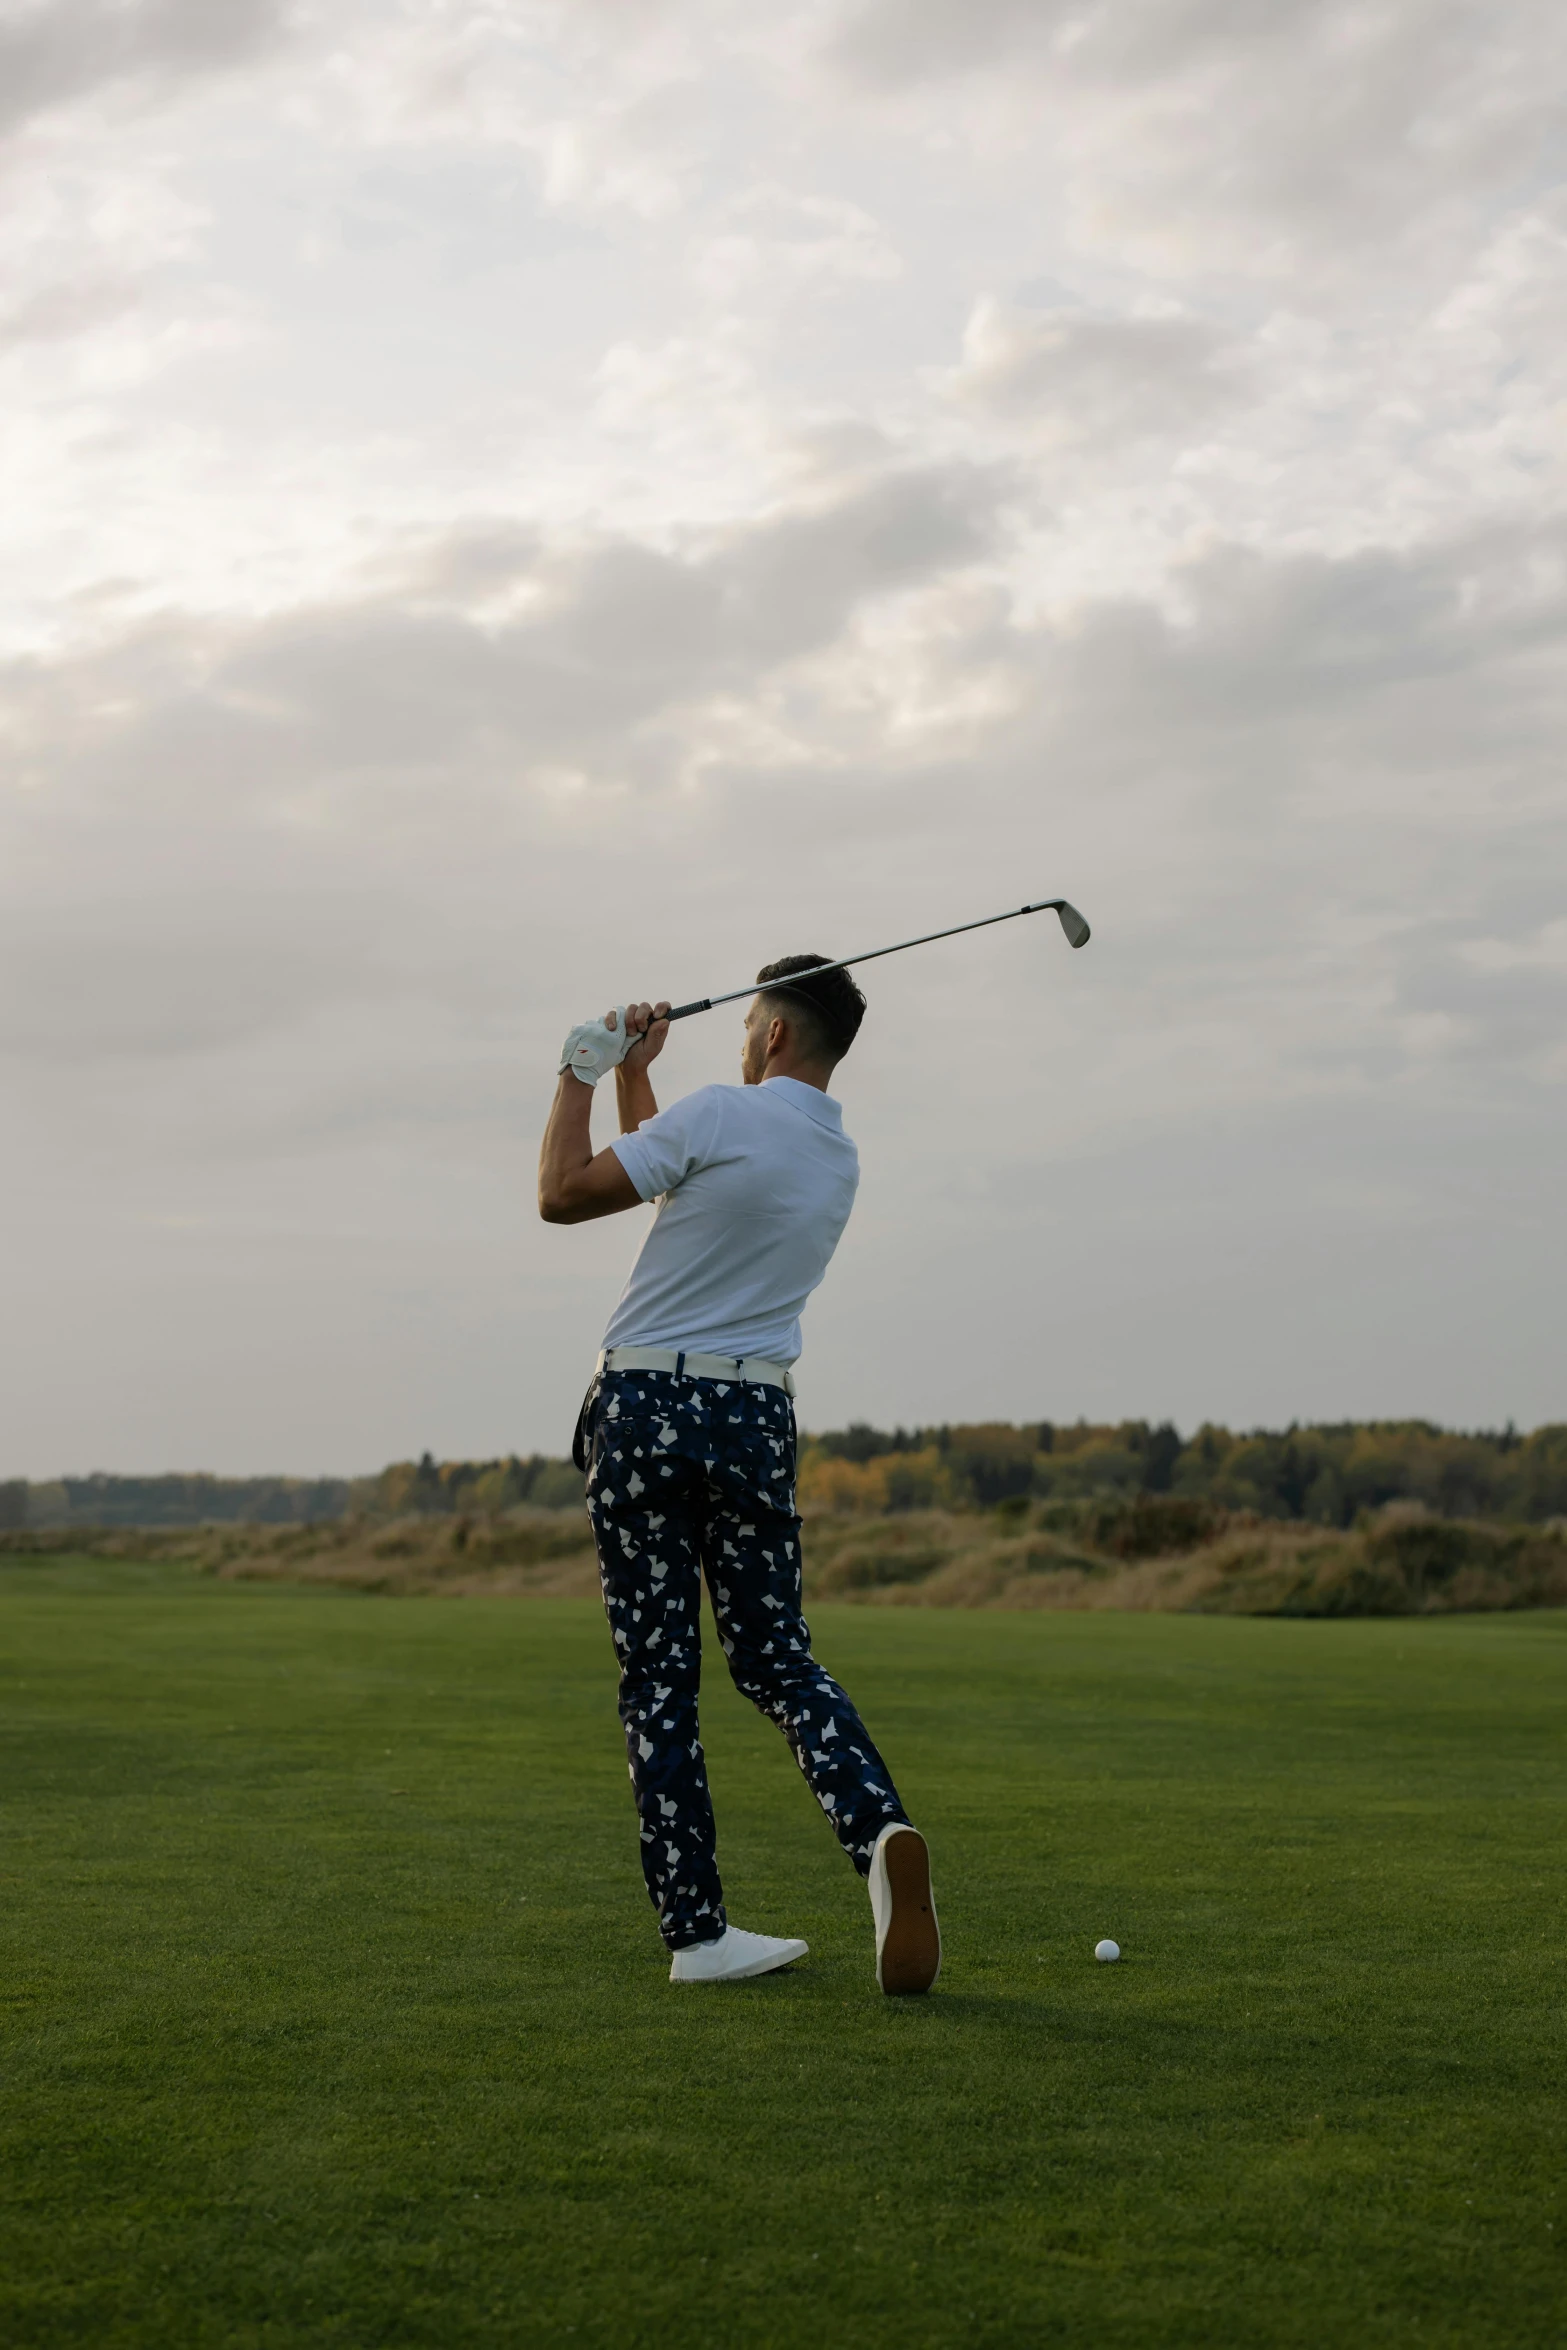 a man swinging a golf club on a cloudy day, a picture, unsplash, patterned clothing, late summer evening, gif, low iso